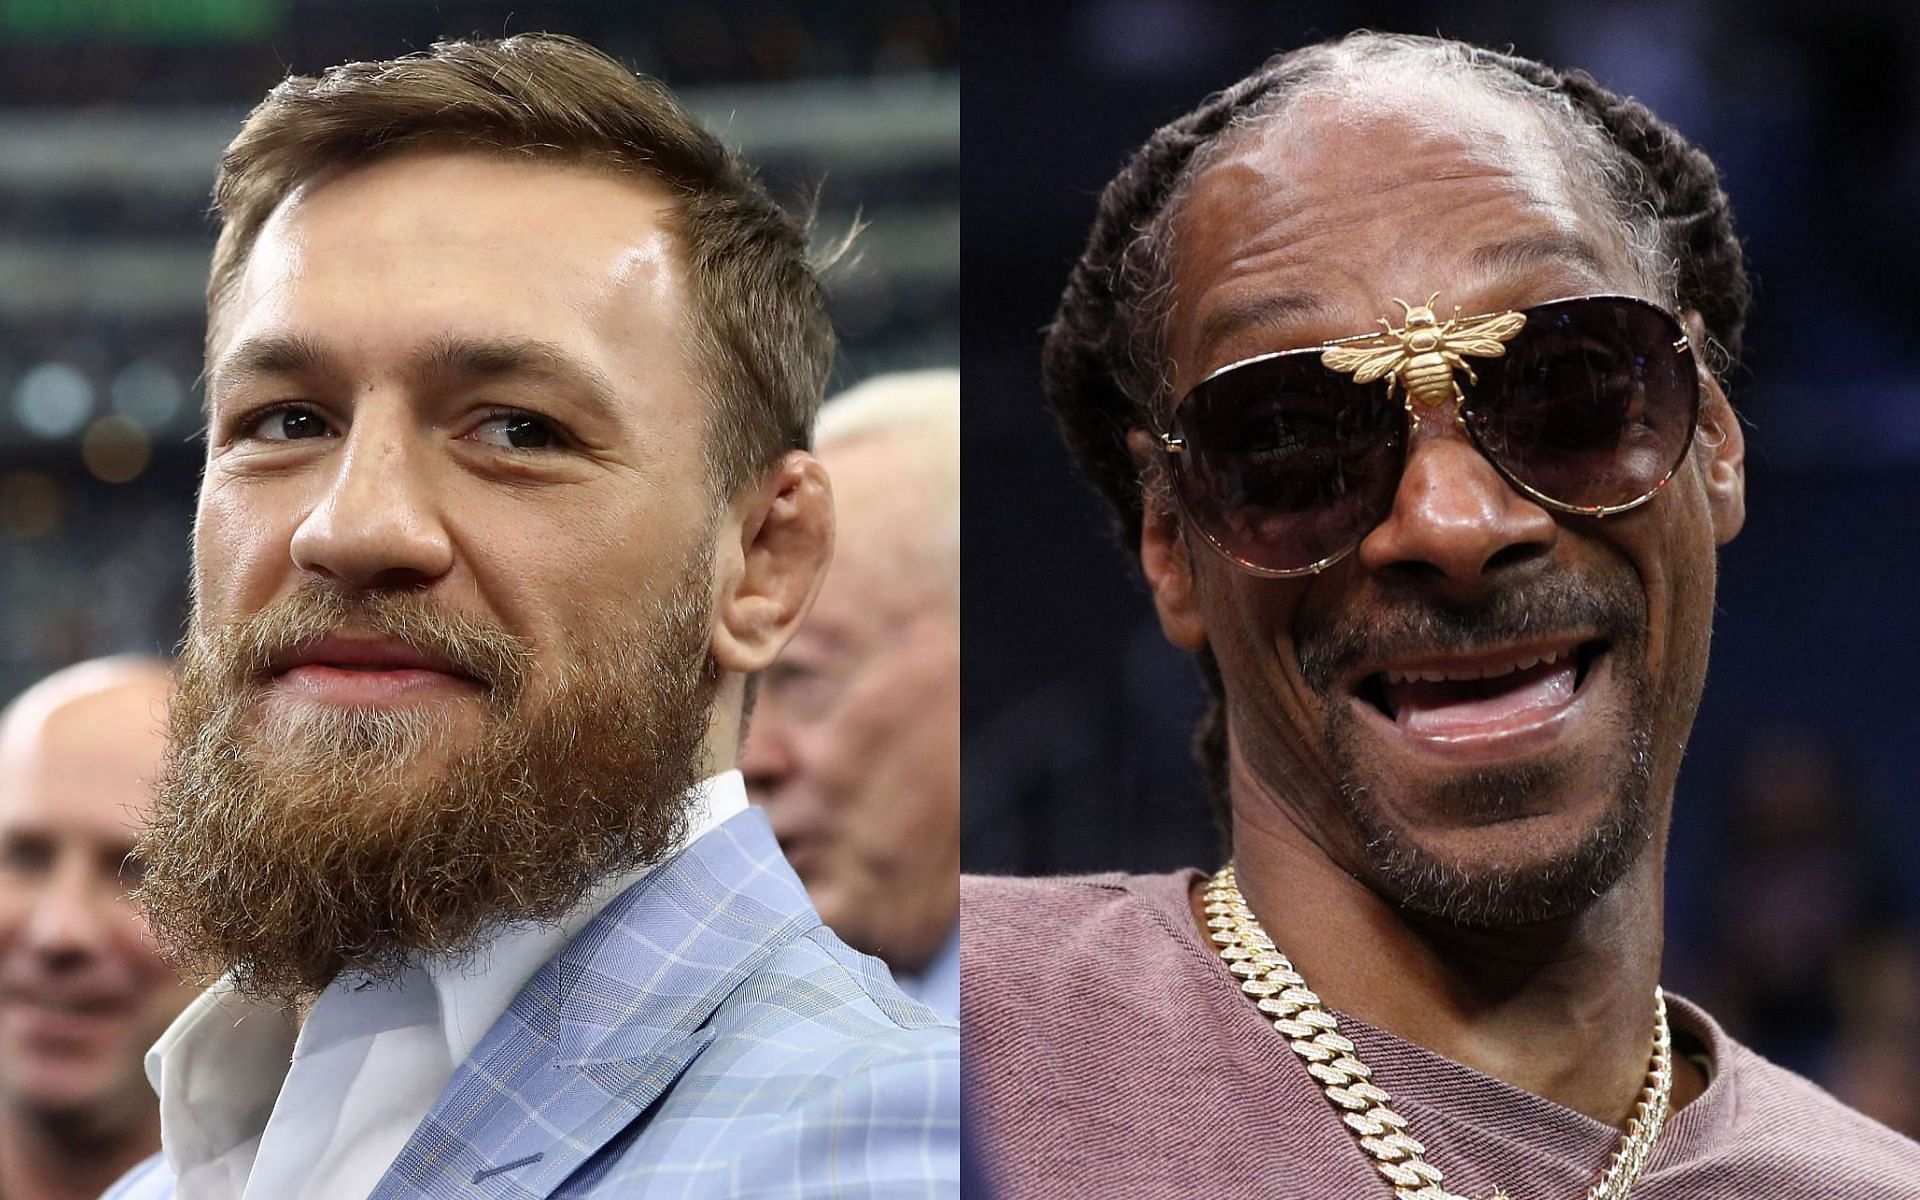 Conor McGregor (left) and Snoop Dogg (right)